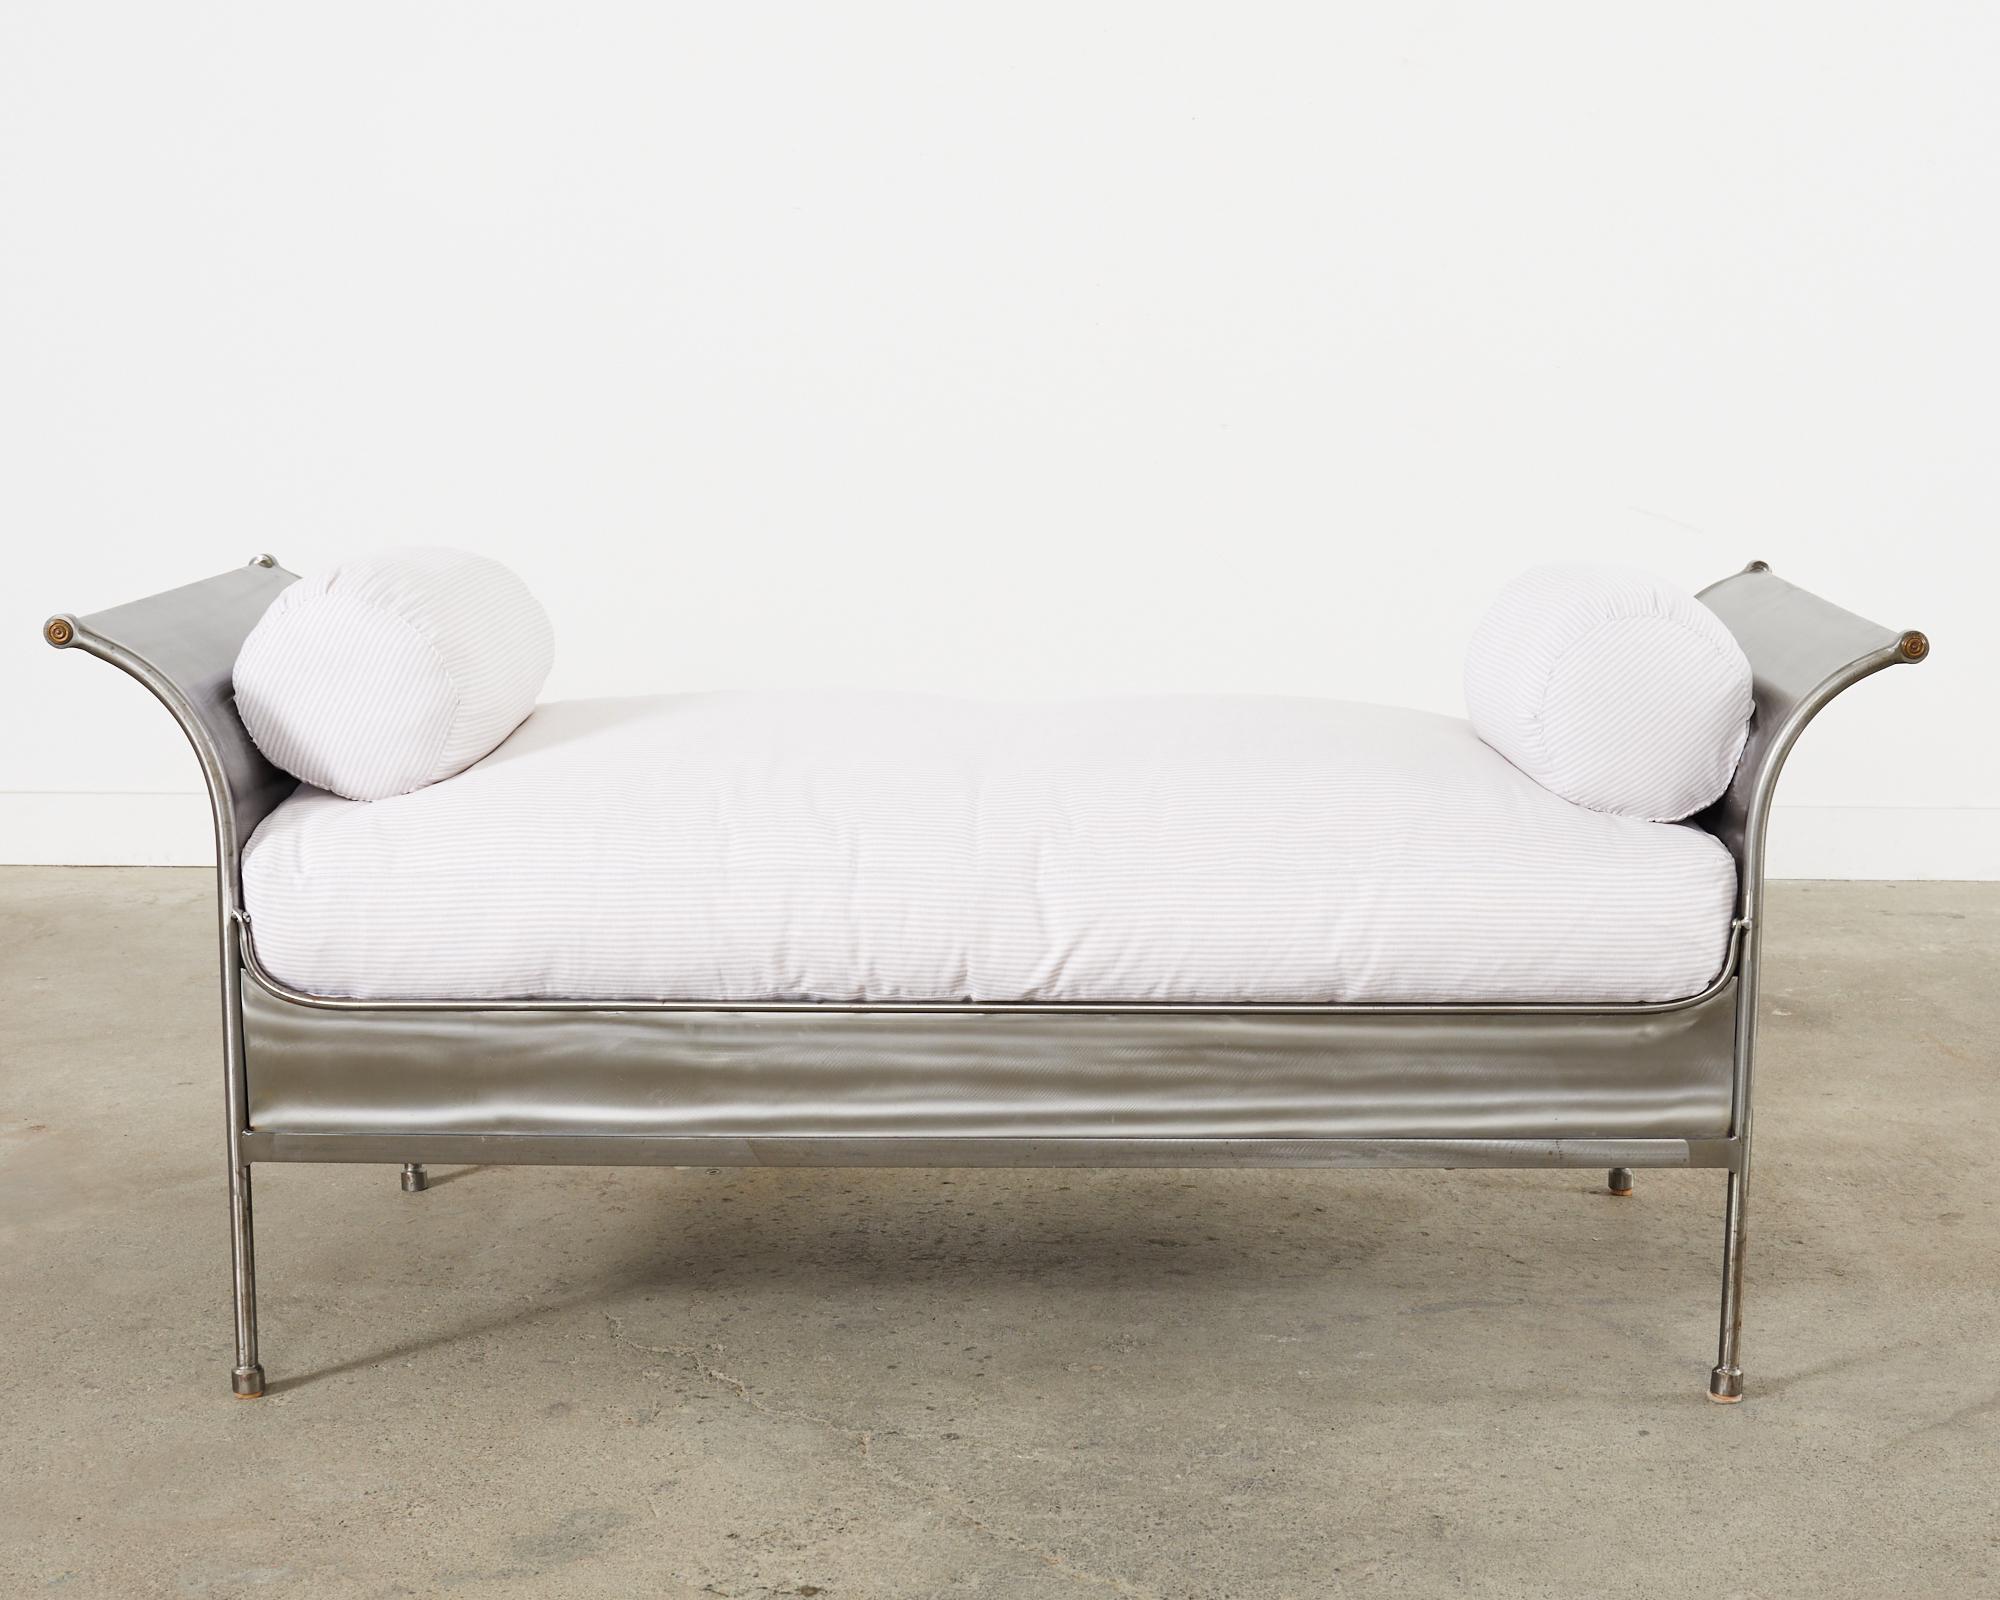 industrial style daybed